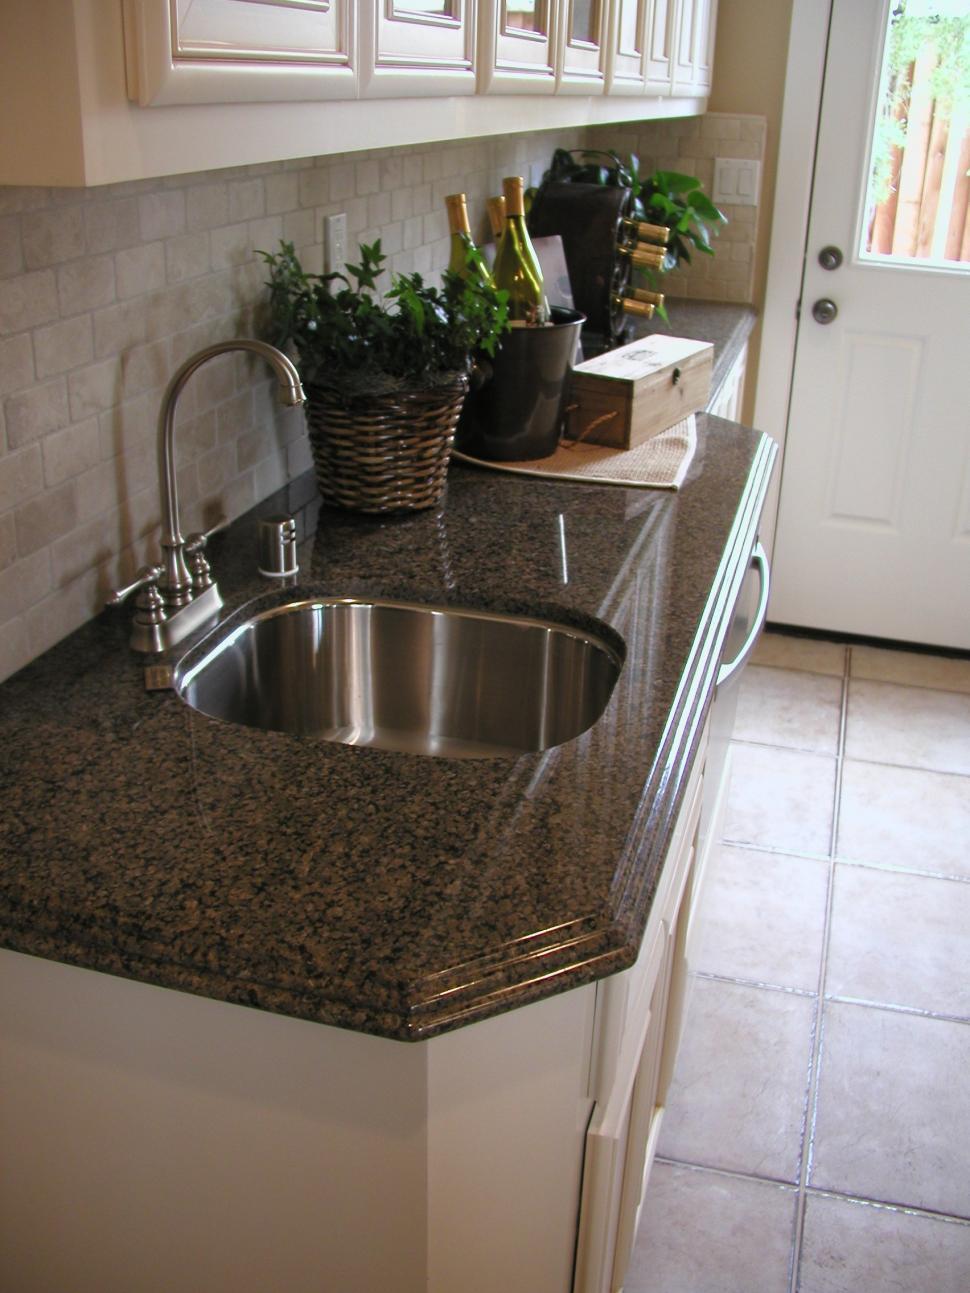 Free Image of Kitchen Second Sink 